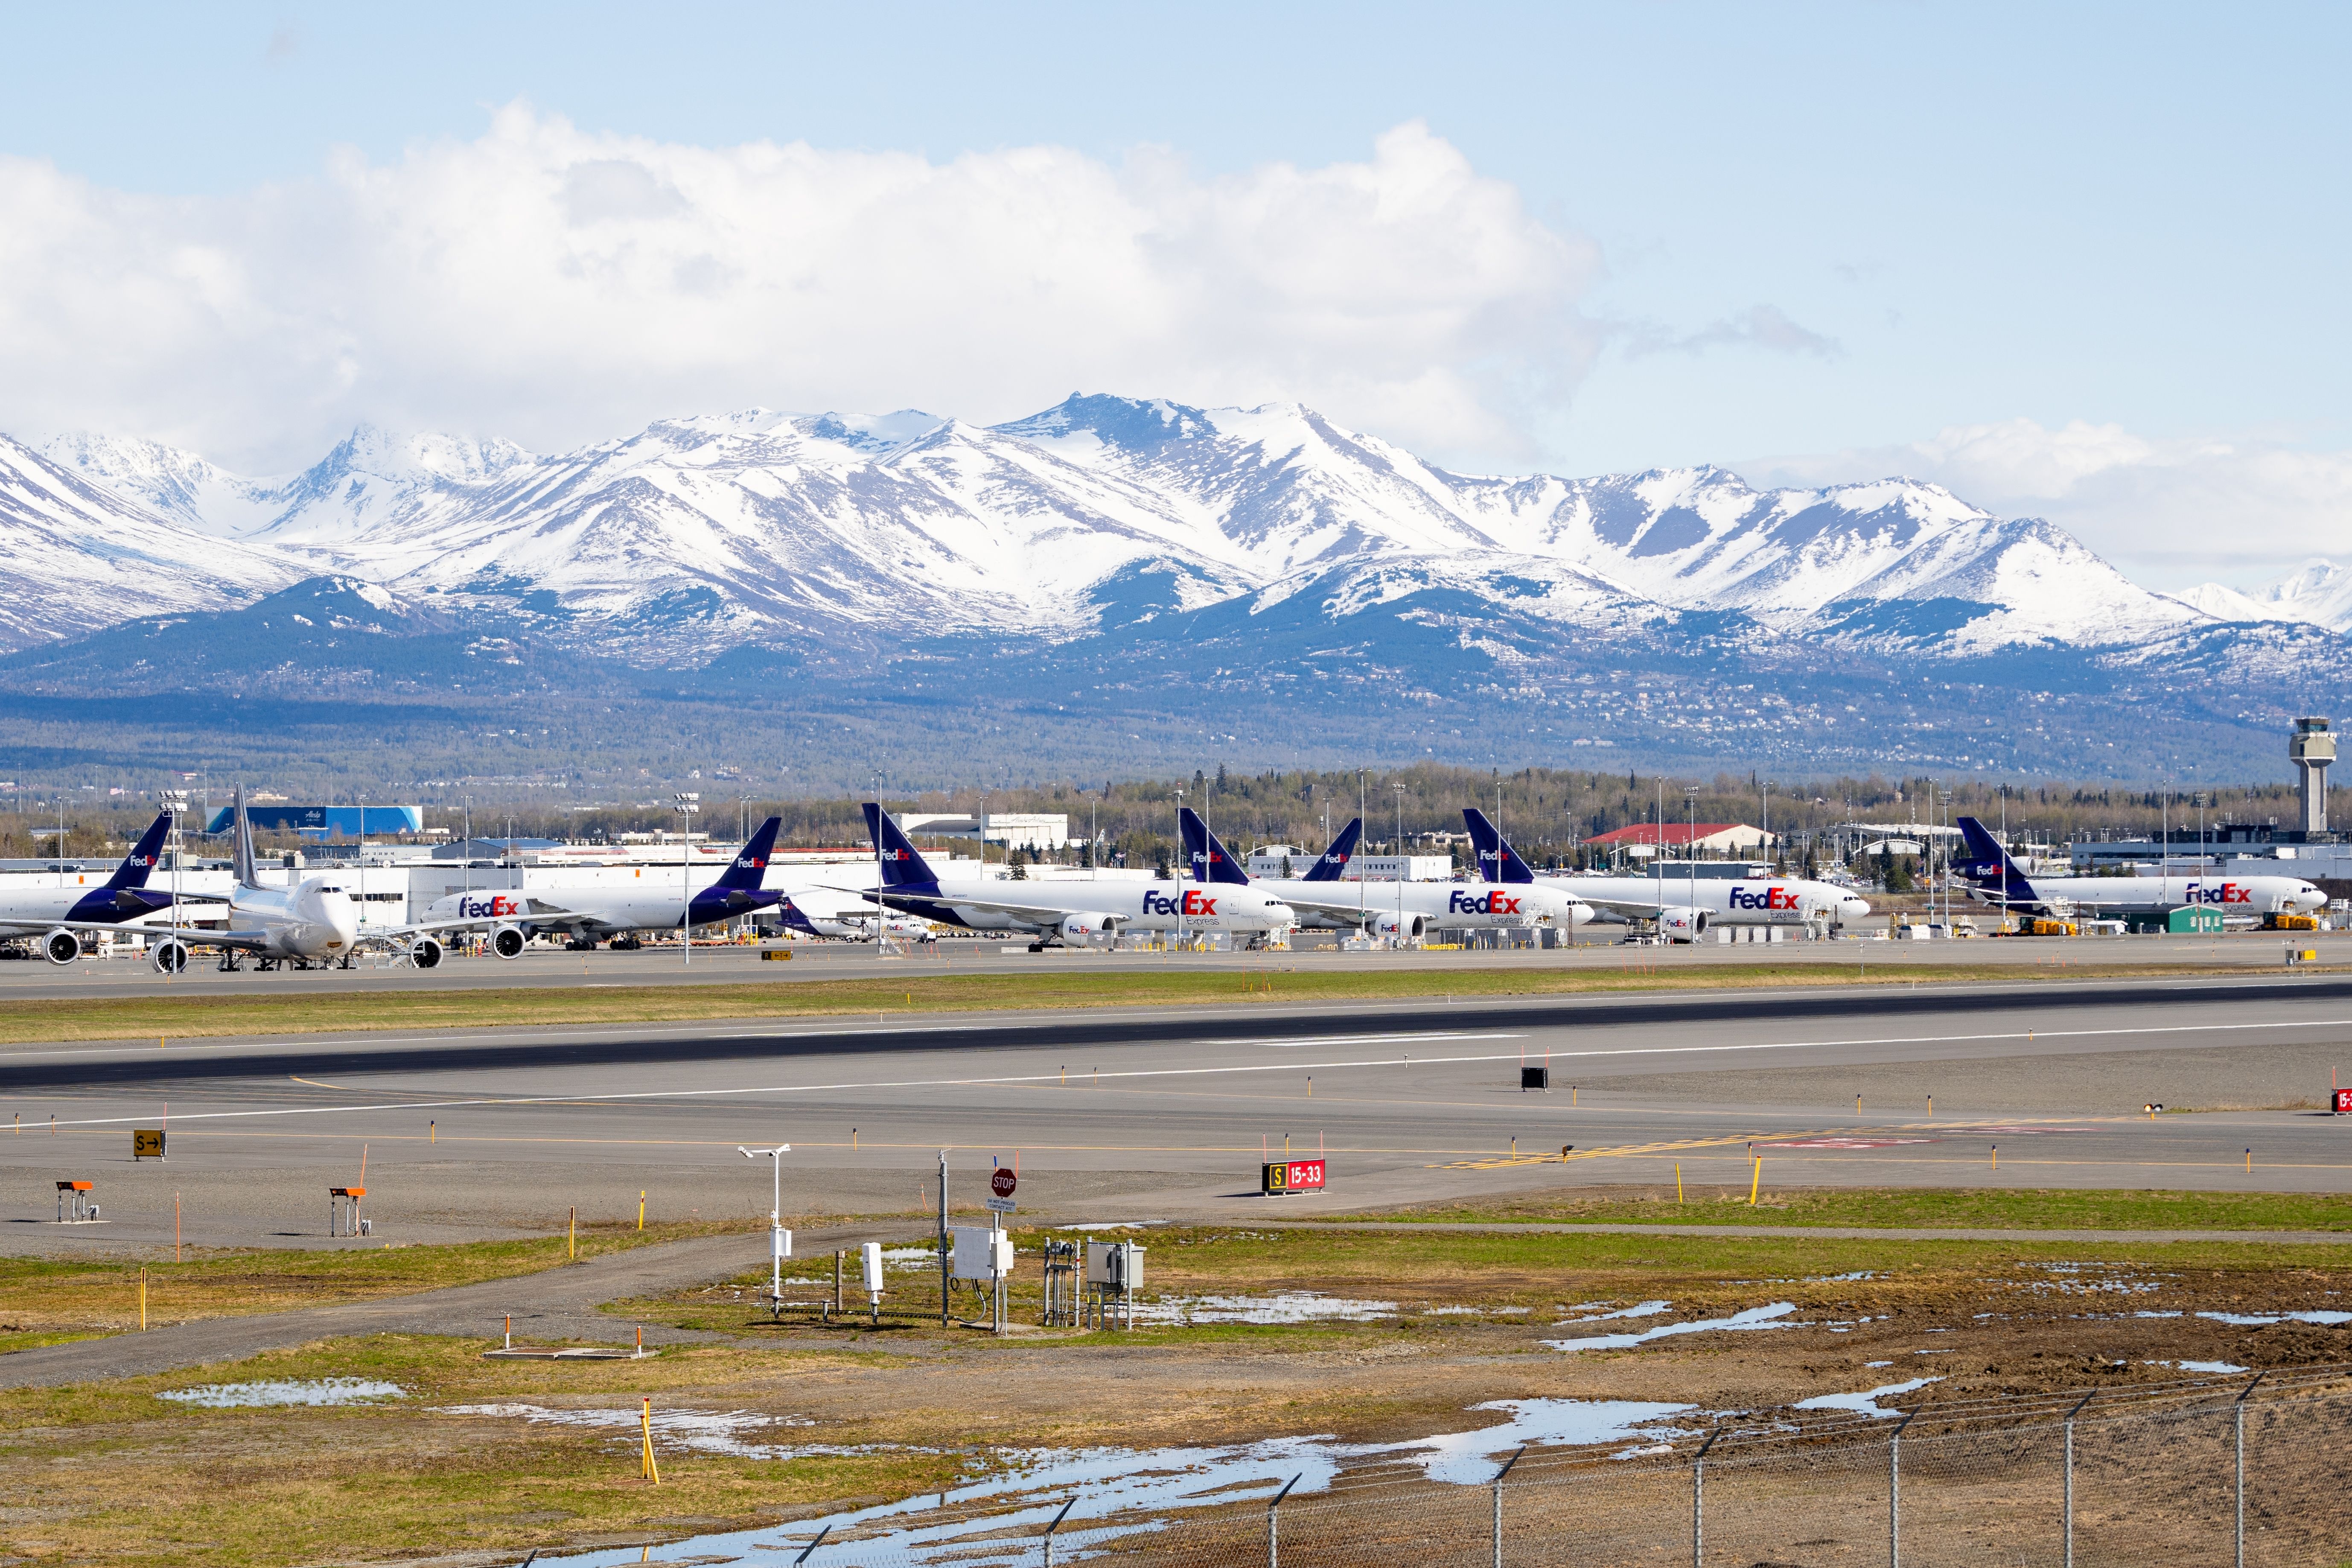 A FedEx ramp at Anchorage airport